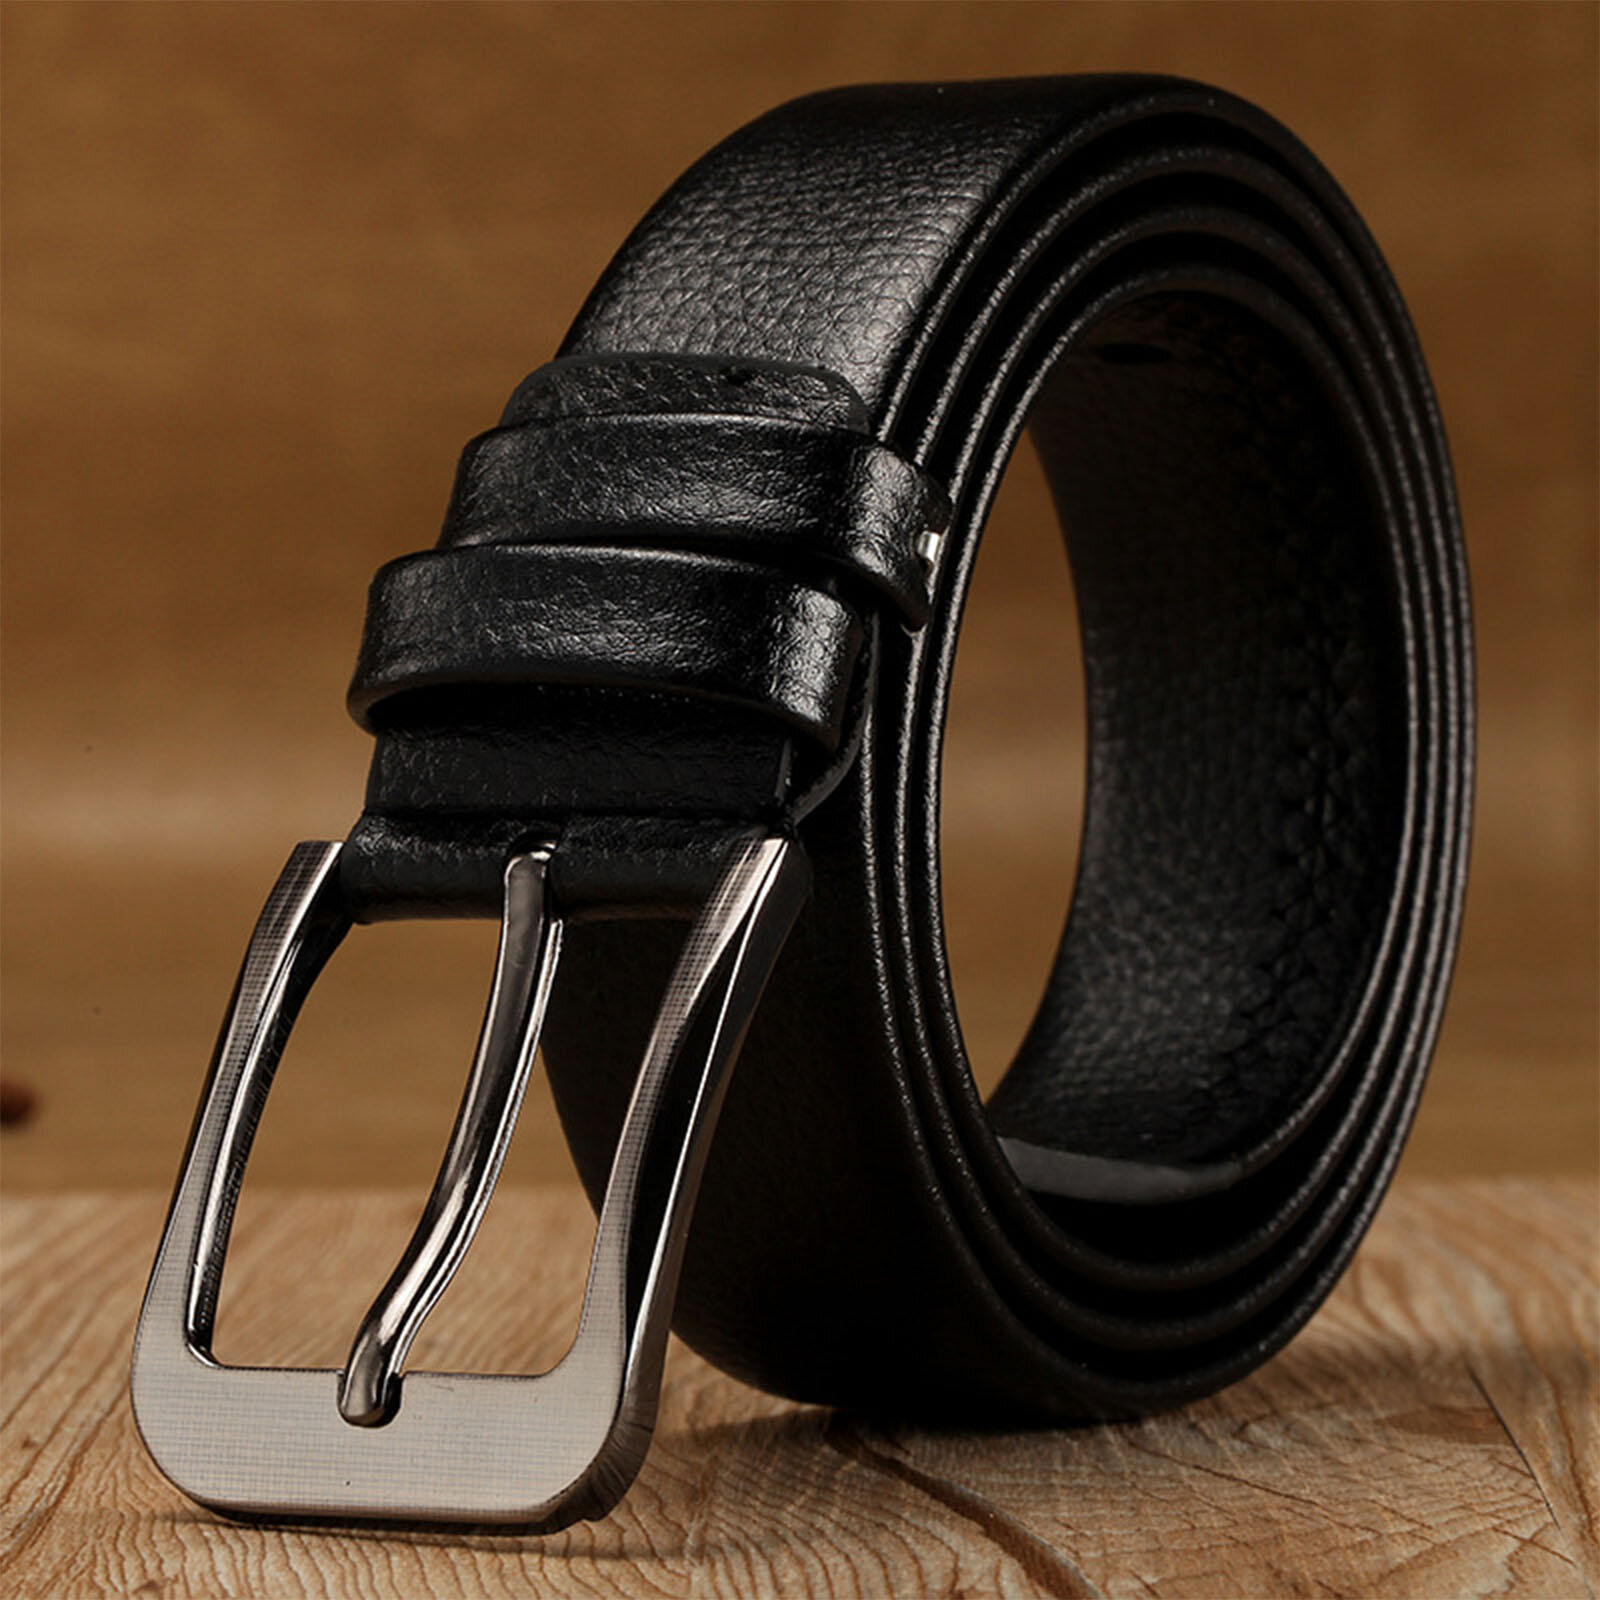 JASSY 120cm Men's Business Casual PU Leather Pin Buckle Covered Belt